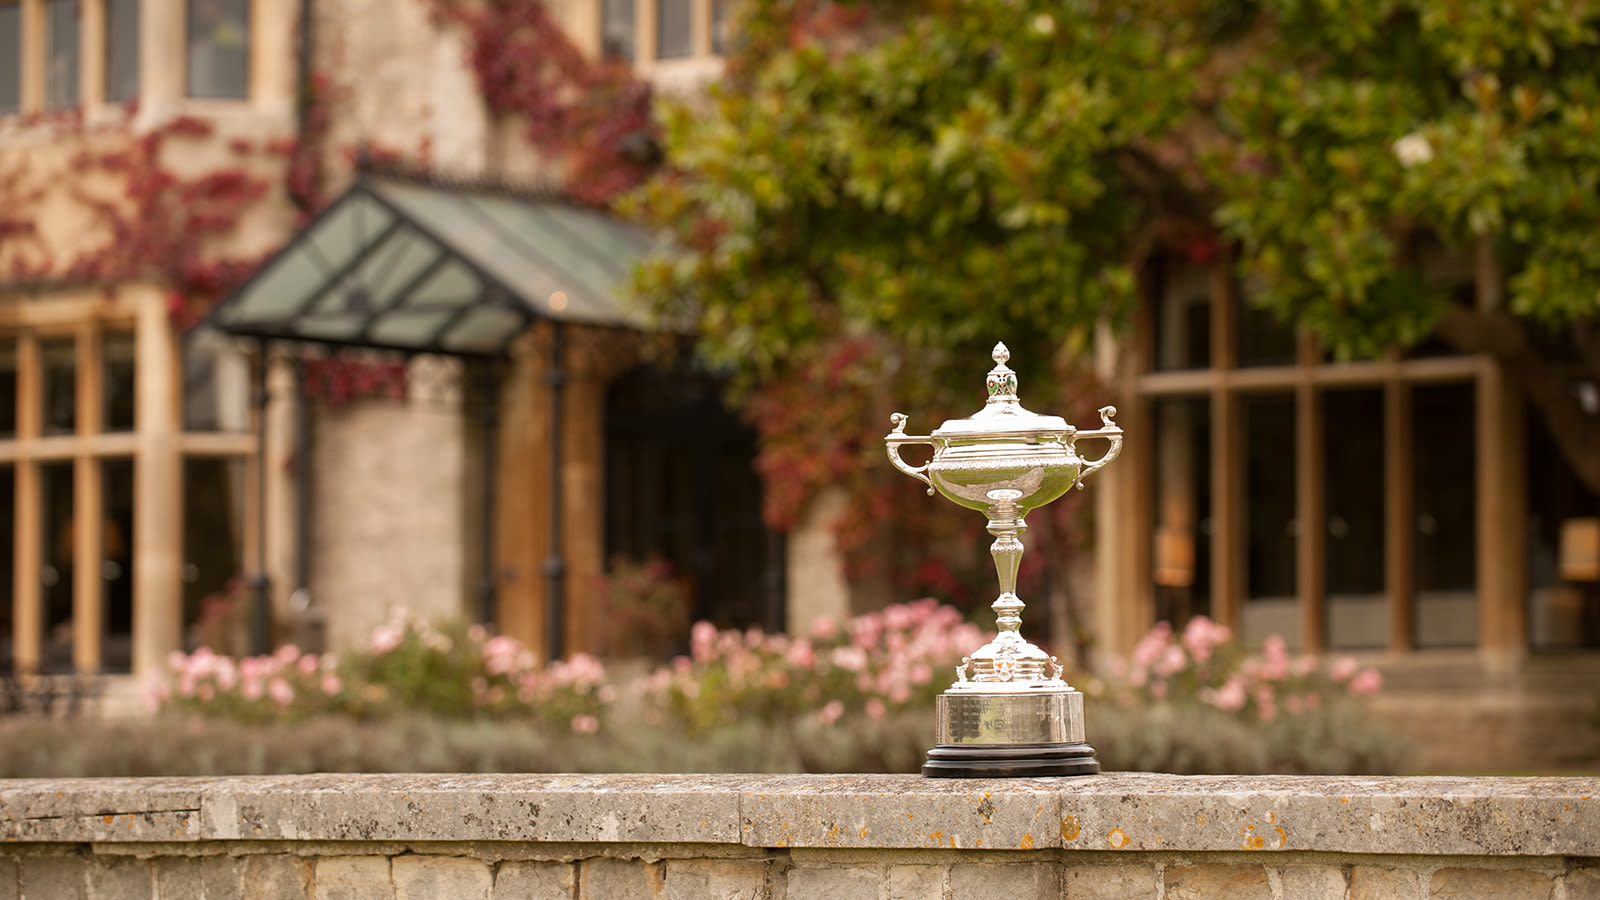 The Llandudno Trophy during the Official Photo Session for the 28th PGA Cup at Fox Hills Golf Club on September 14, 2017 in Ottershaw, Surrey, England. (Montana Pritchard/PGA of America)